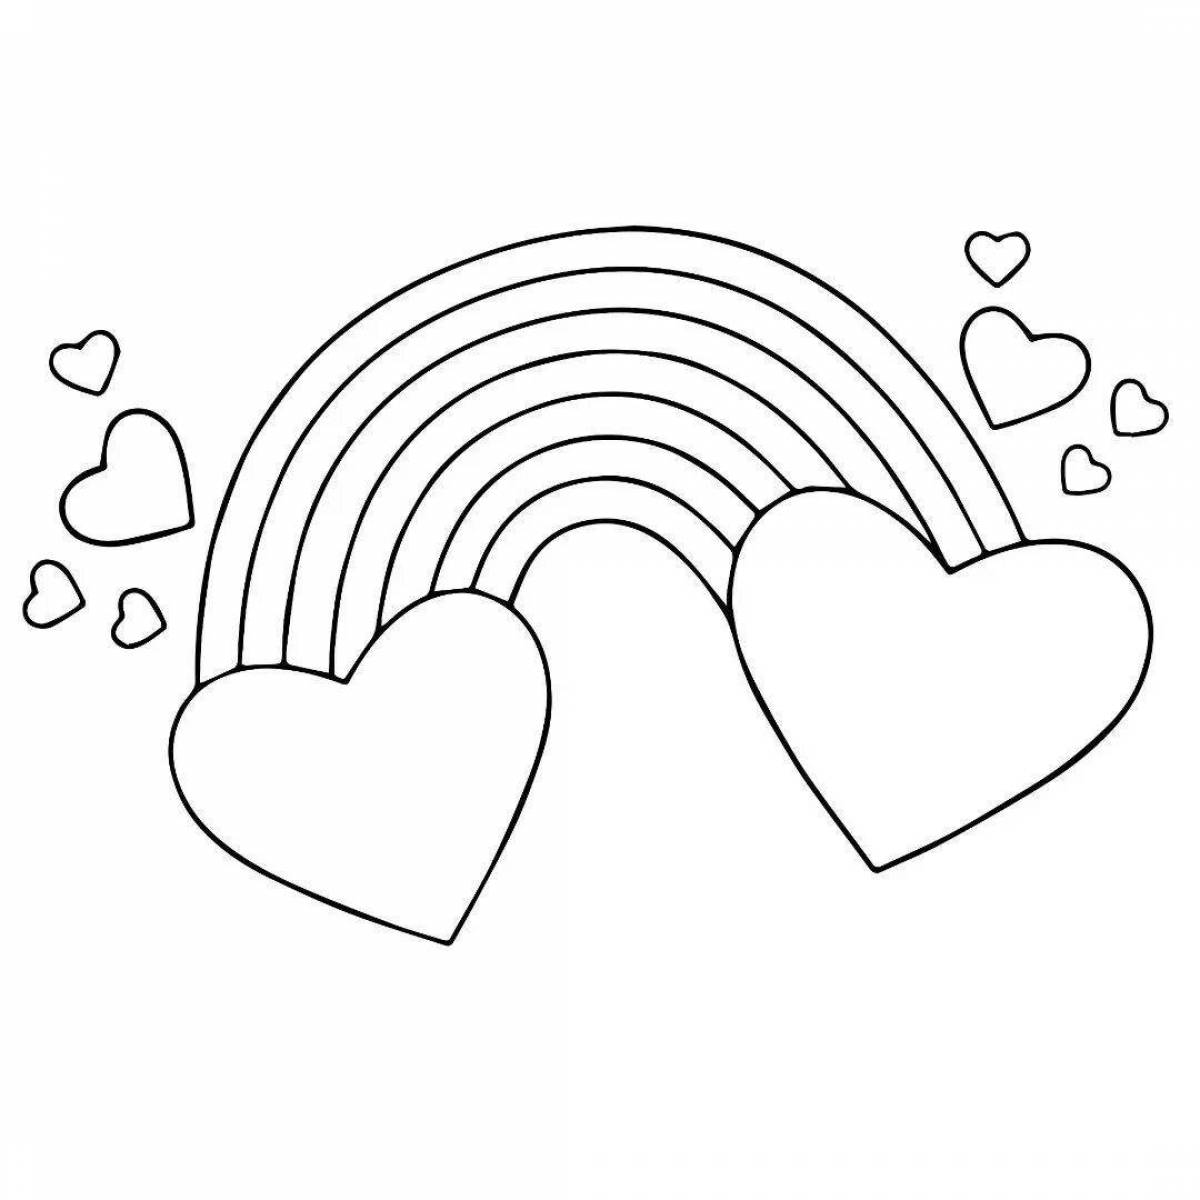 Exciting heart coloring page